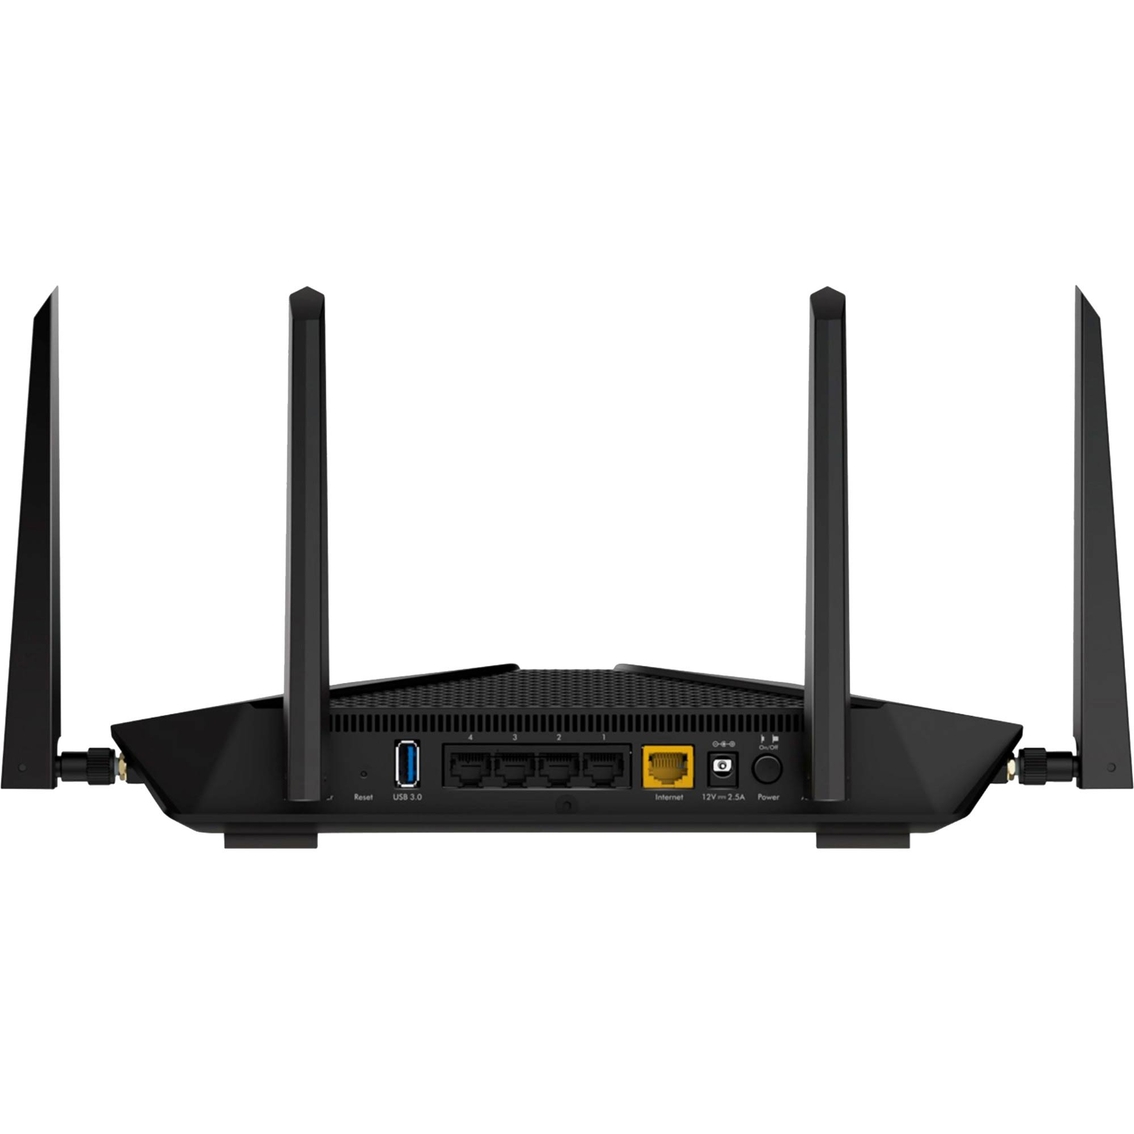 Netgear Nighthawk AX5400 Dual Band Wireless and Ethernet Router - Image 3 of 5